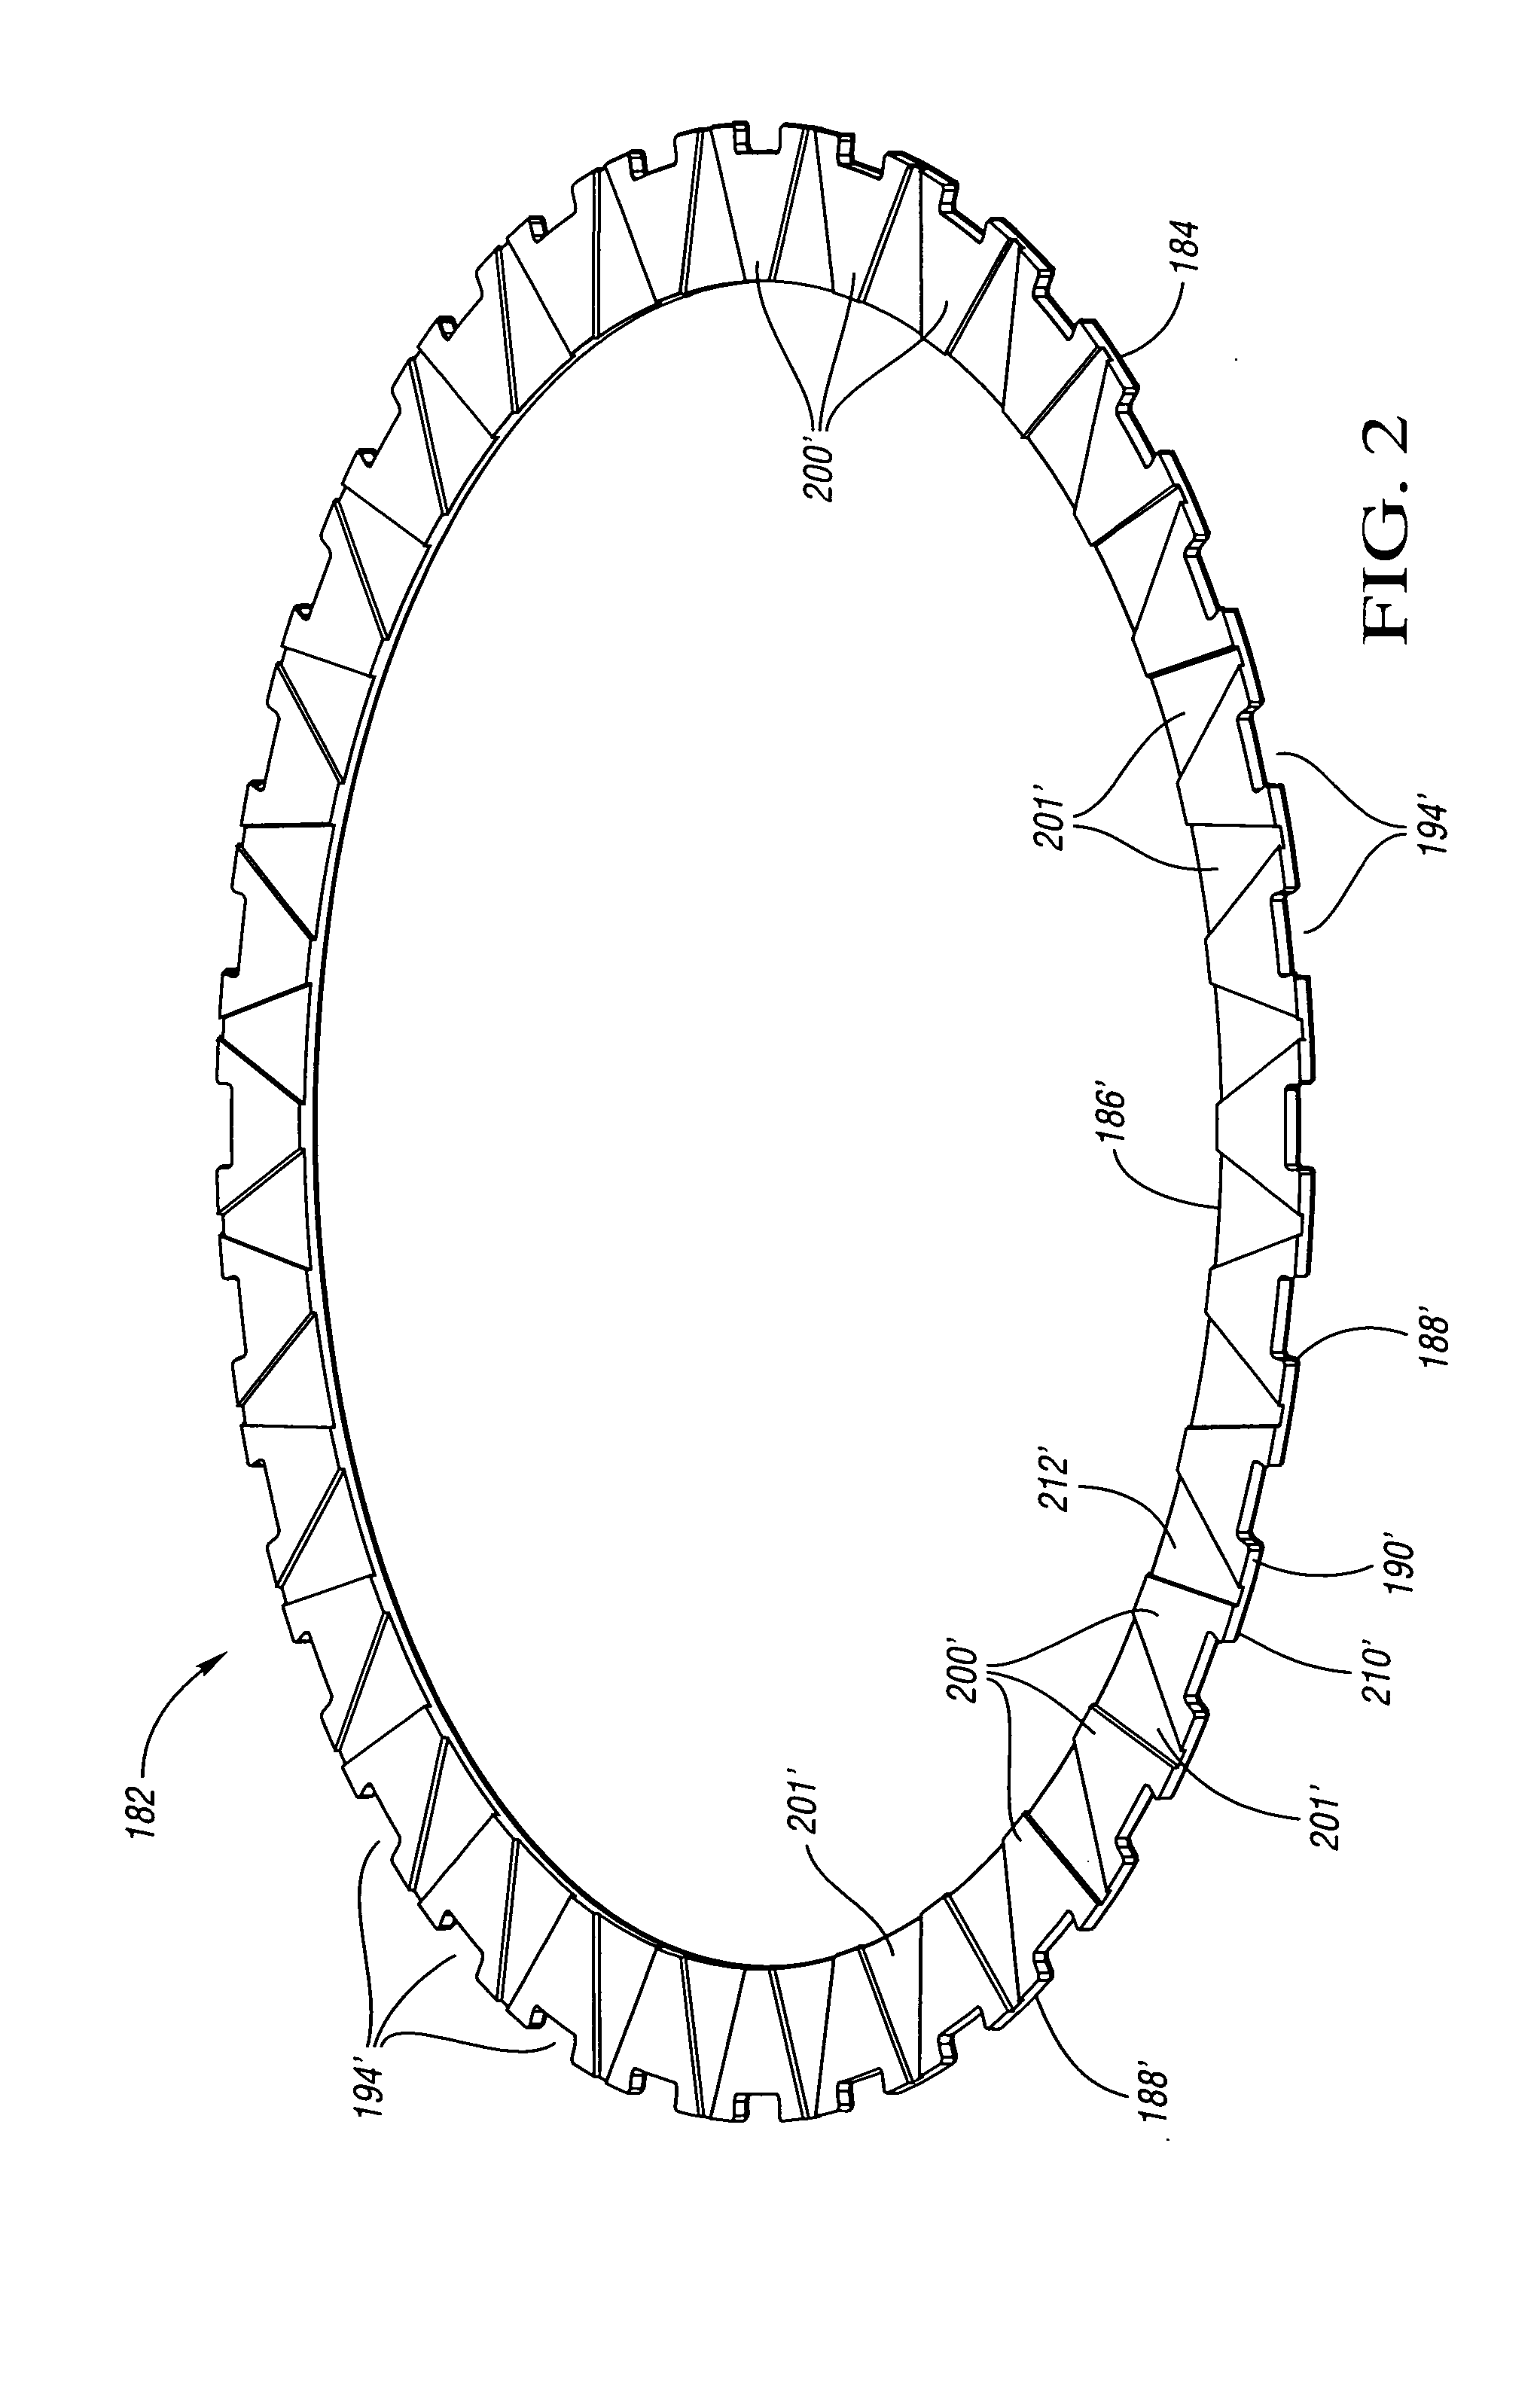 Segmented clutch plate for automatic transmission